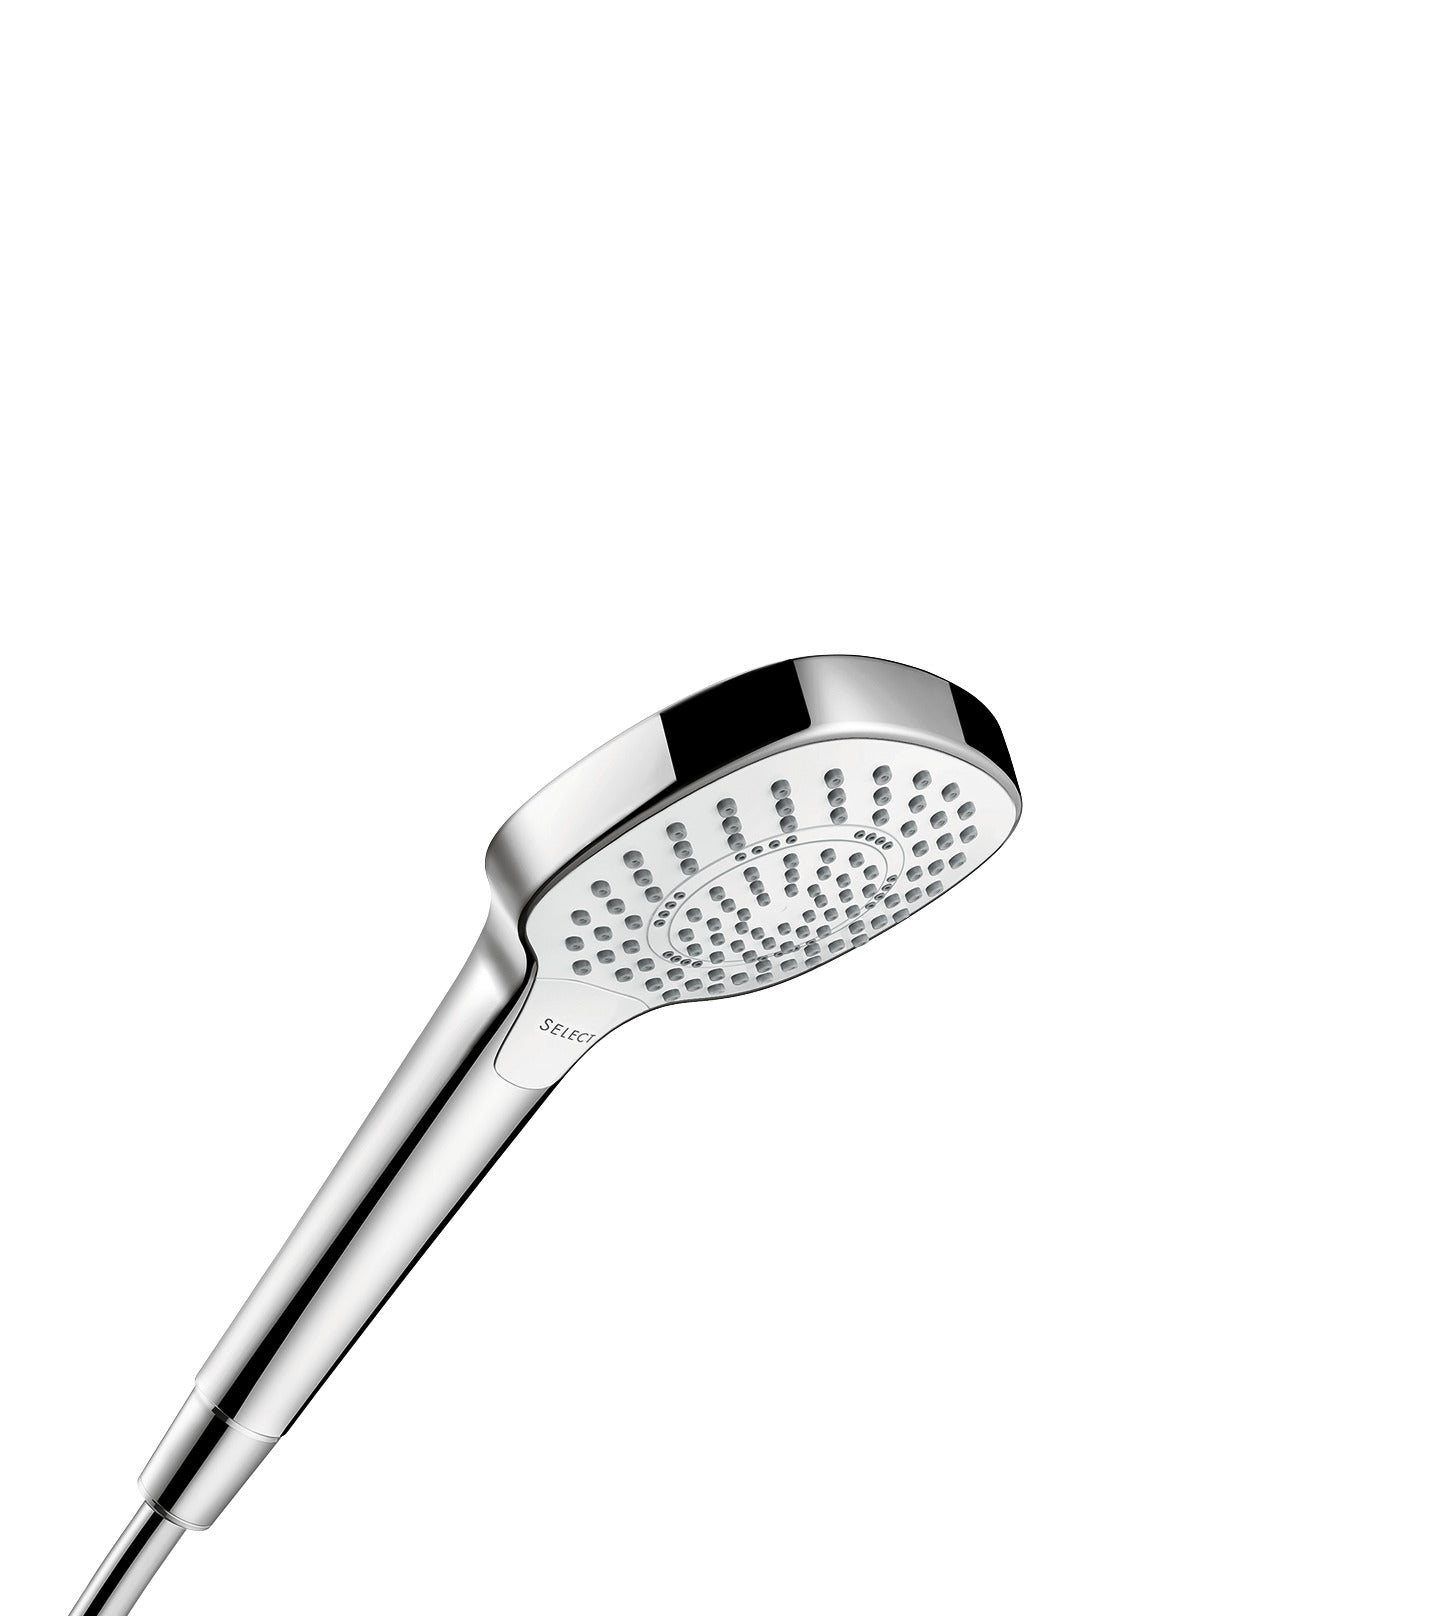 HANSGROHE 26811401 Croma Select E Handshower 110 3-Jet, 2.0 GPM in White/Chrome